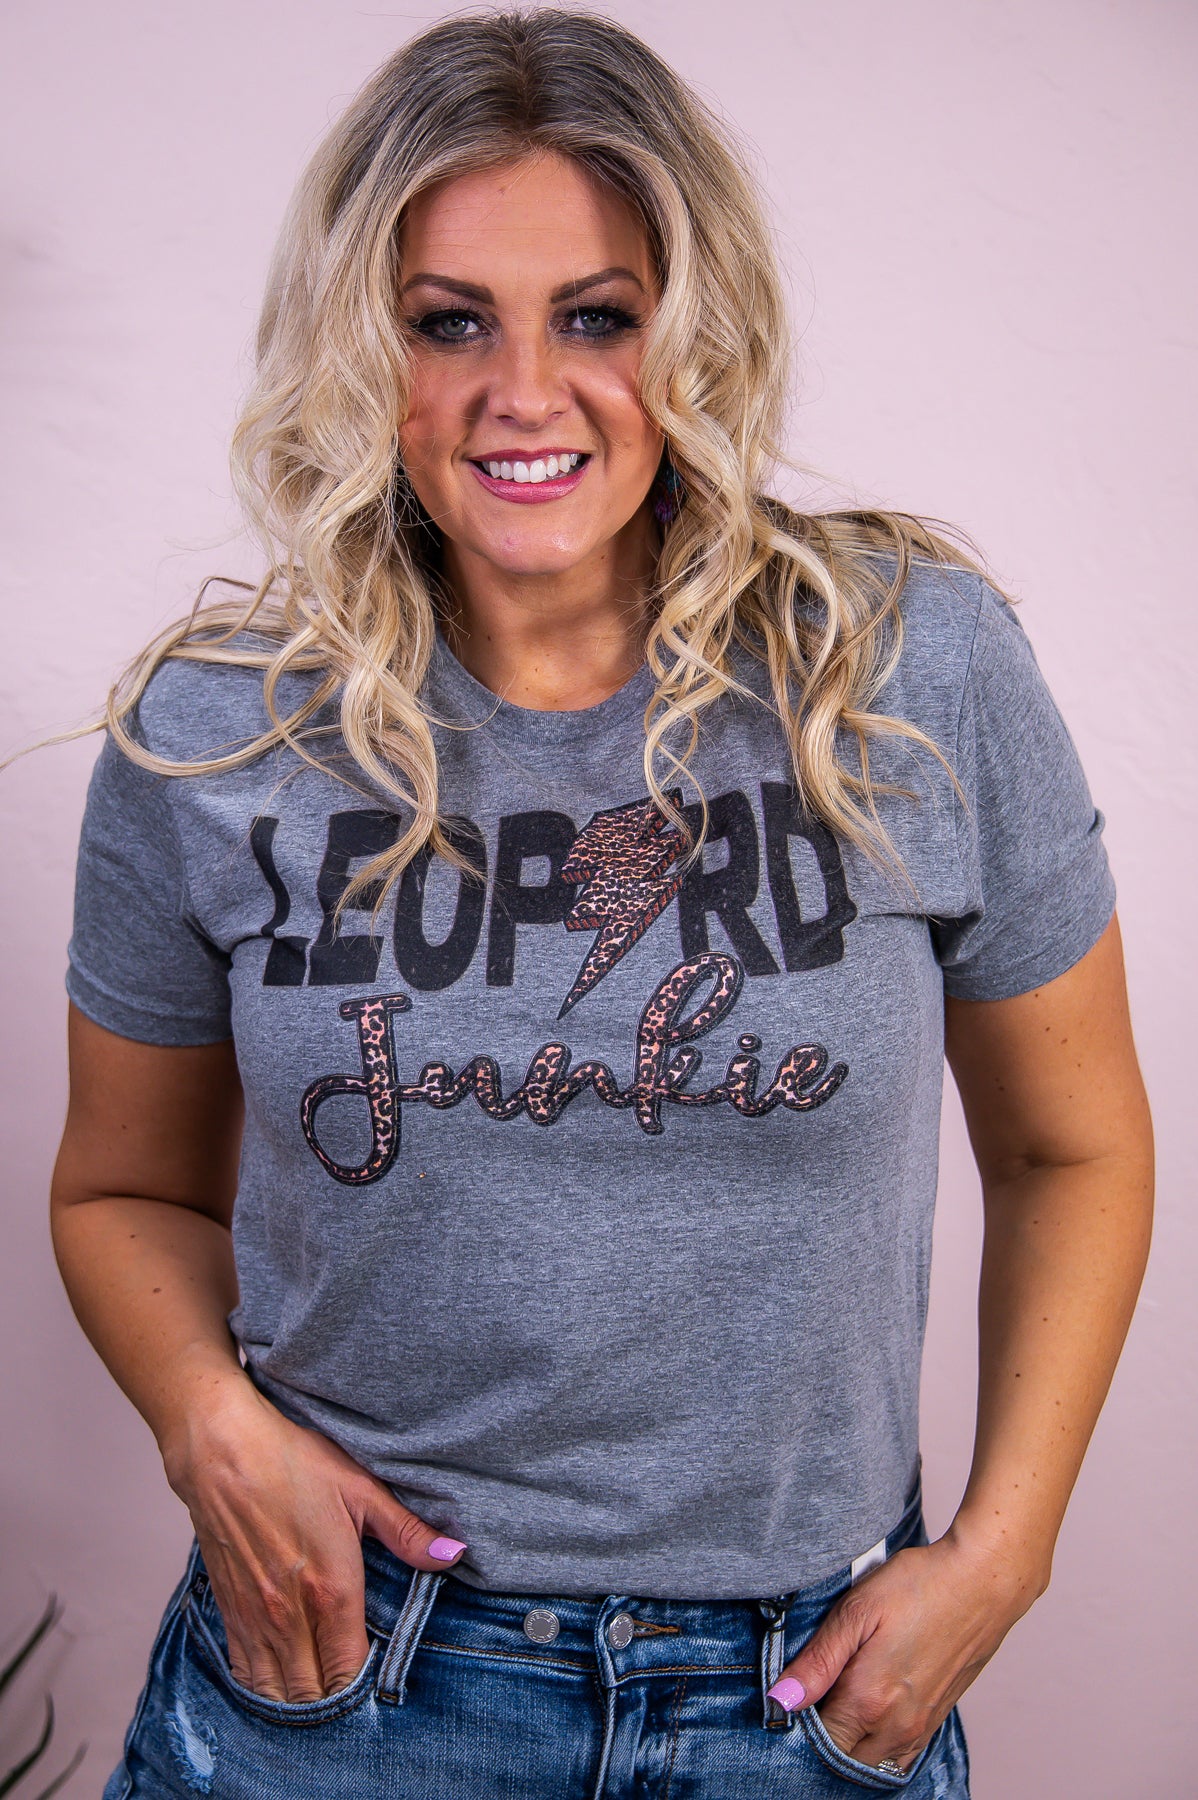 She Ruled The Wild Premium Heather Gray Graphic Tee - A3270PHG